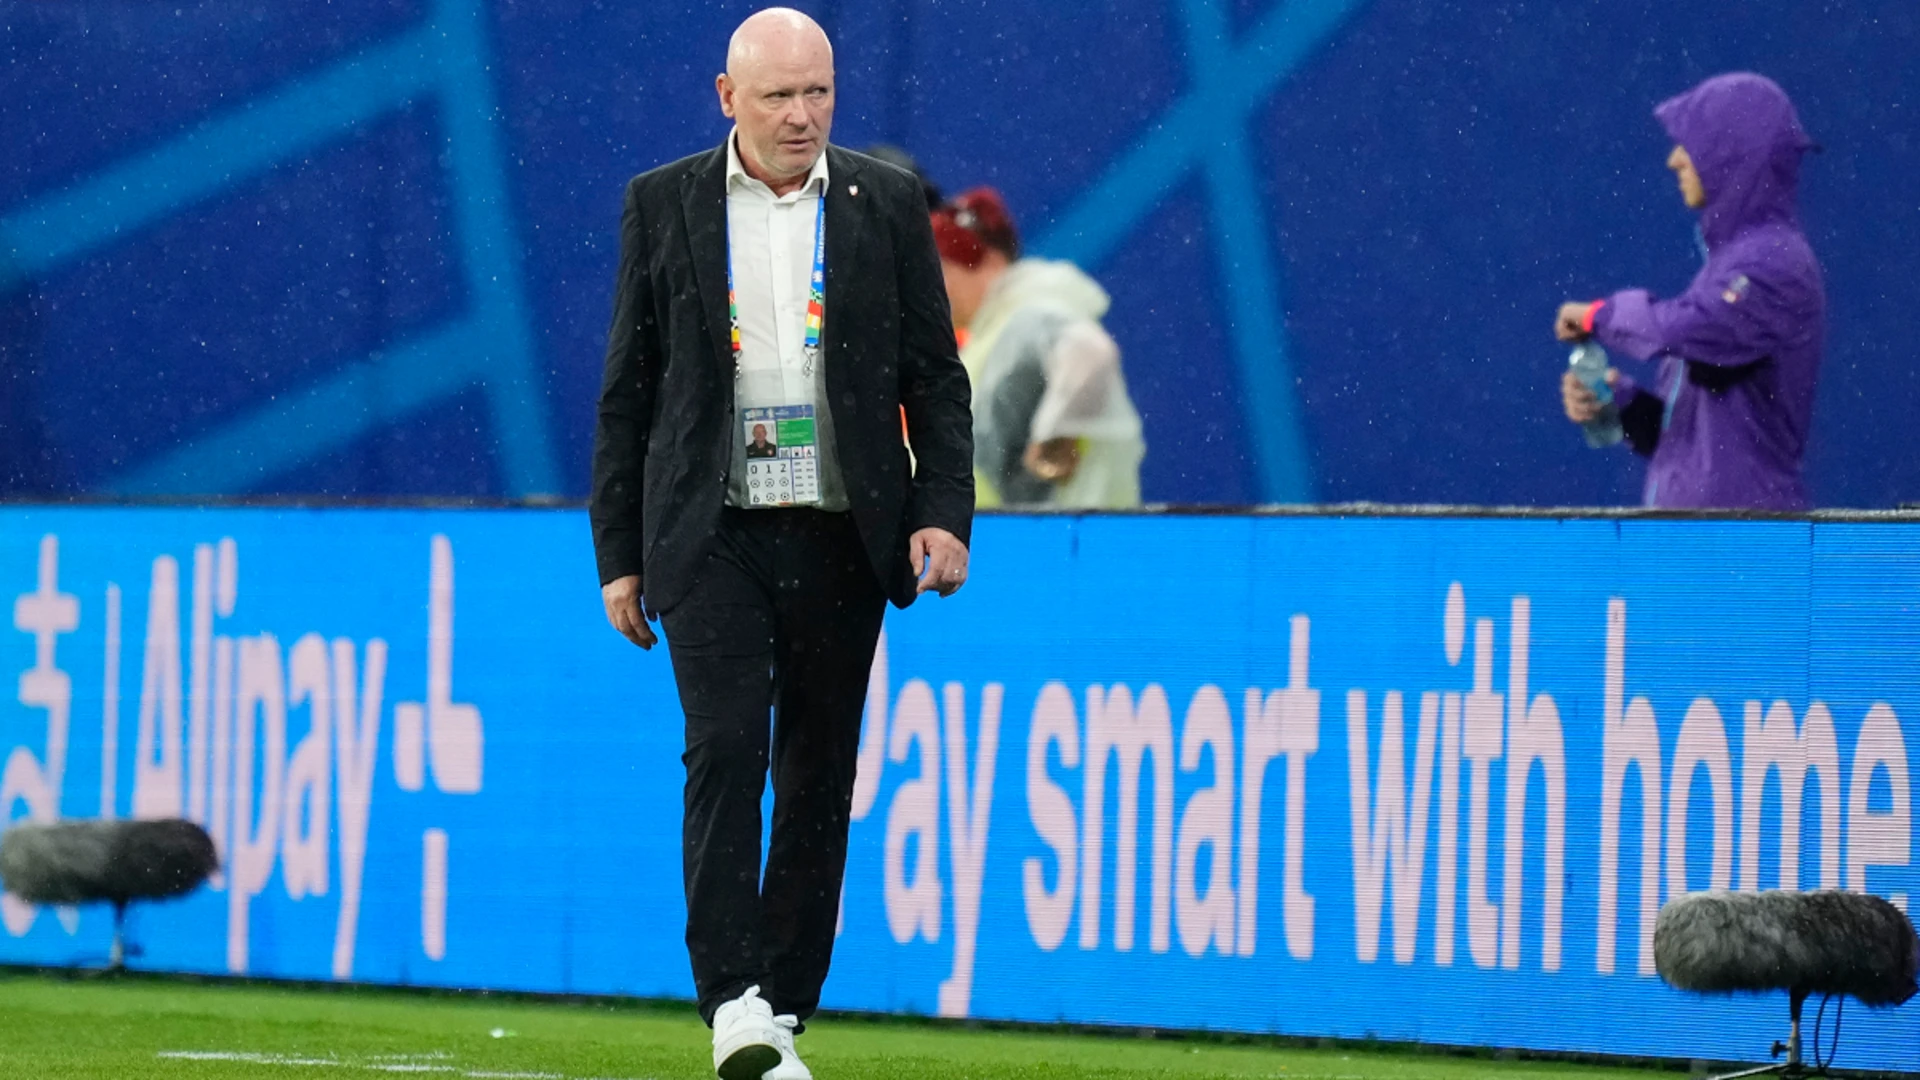 Portugal's dominance left Czechs too tired to attack, coach says